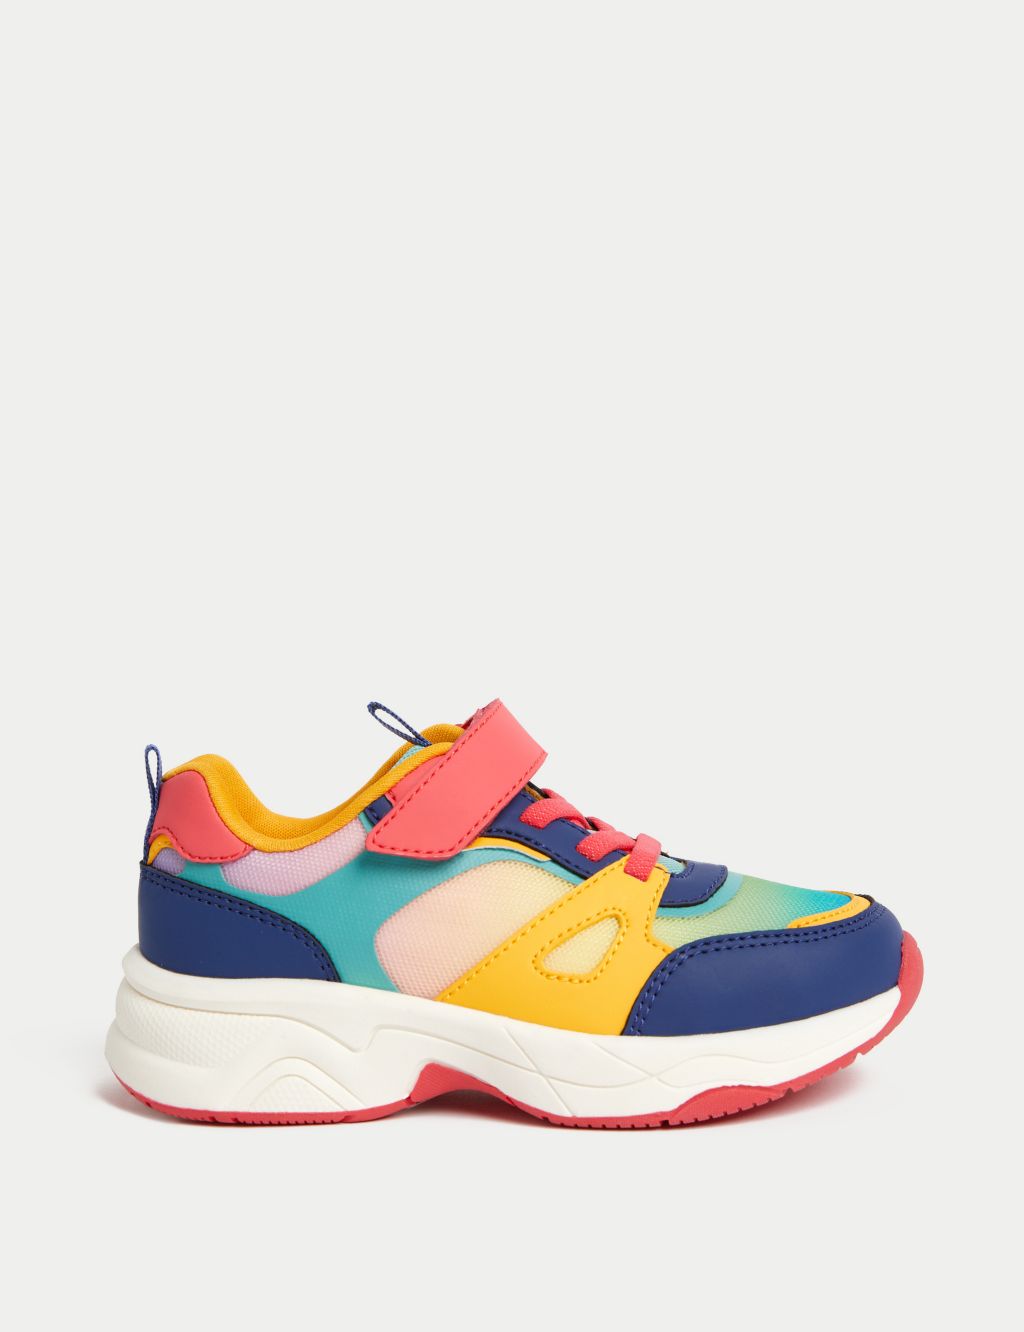 Buy Girls' Trainers from the M&S UK Online Shop